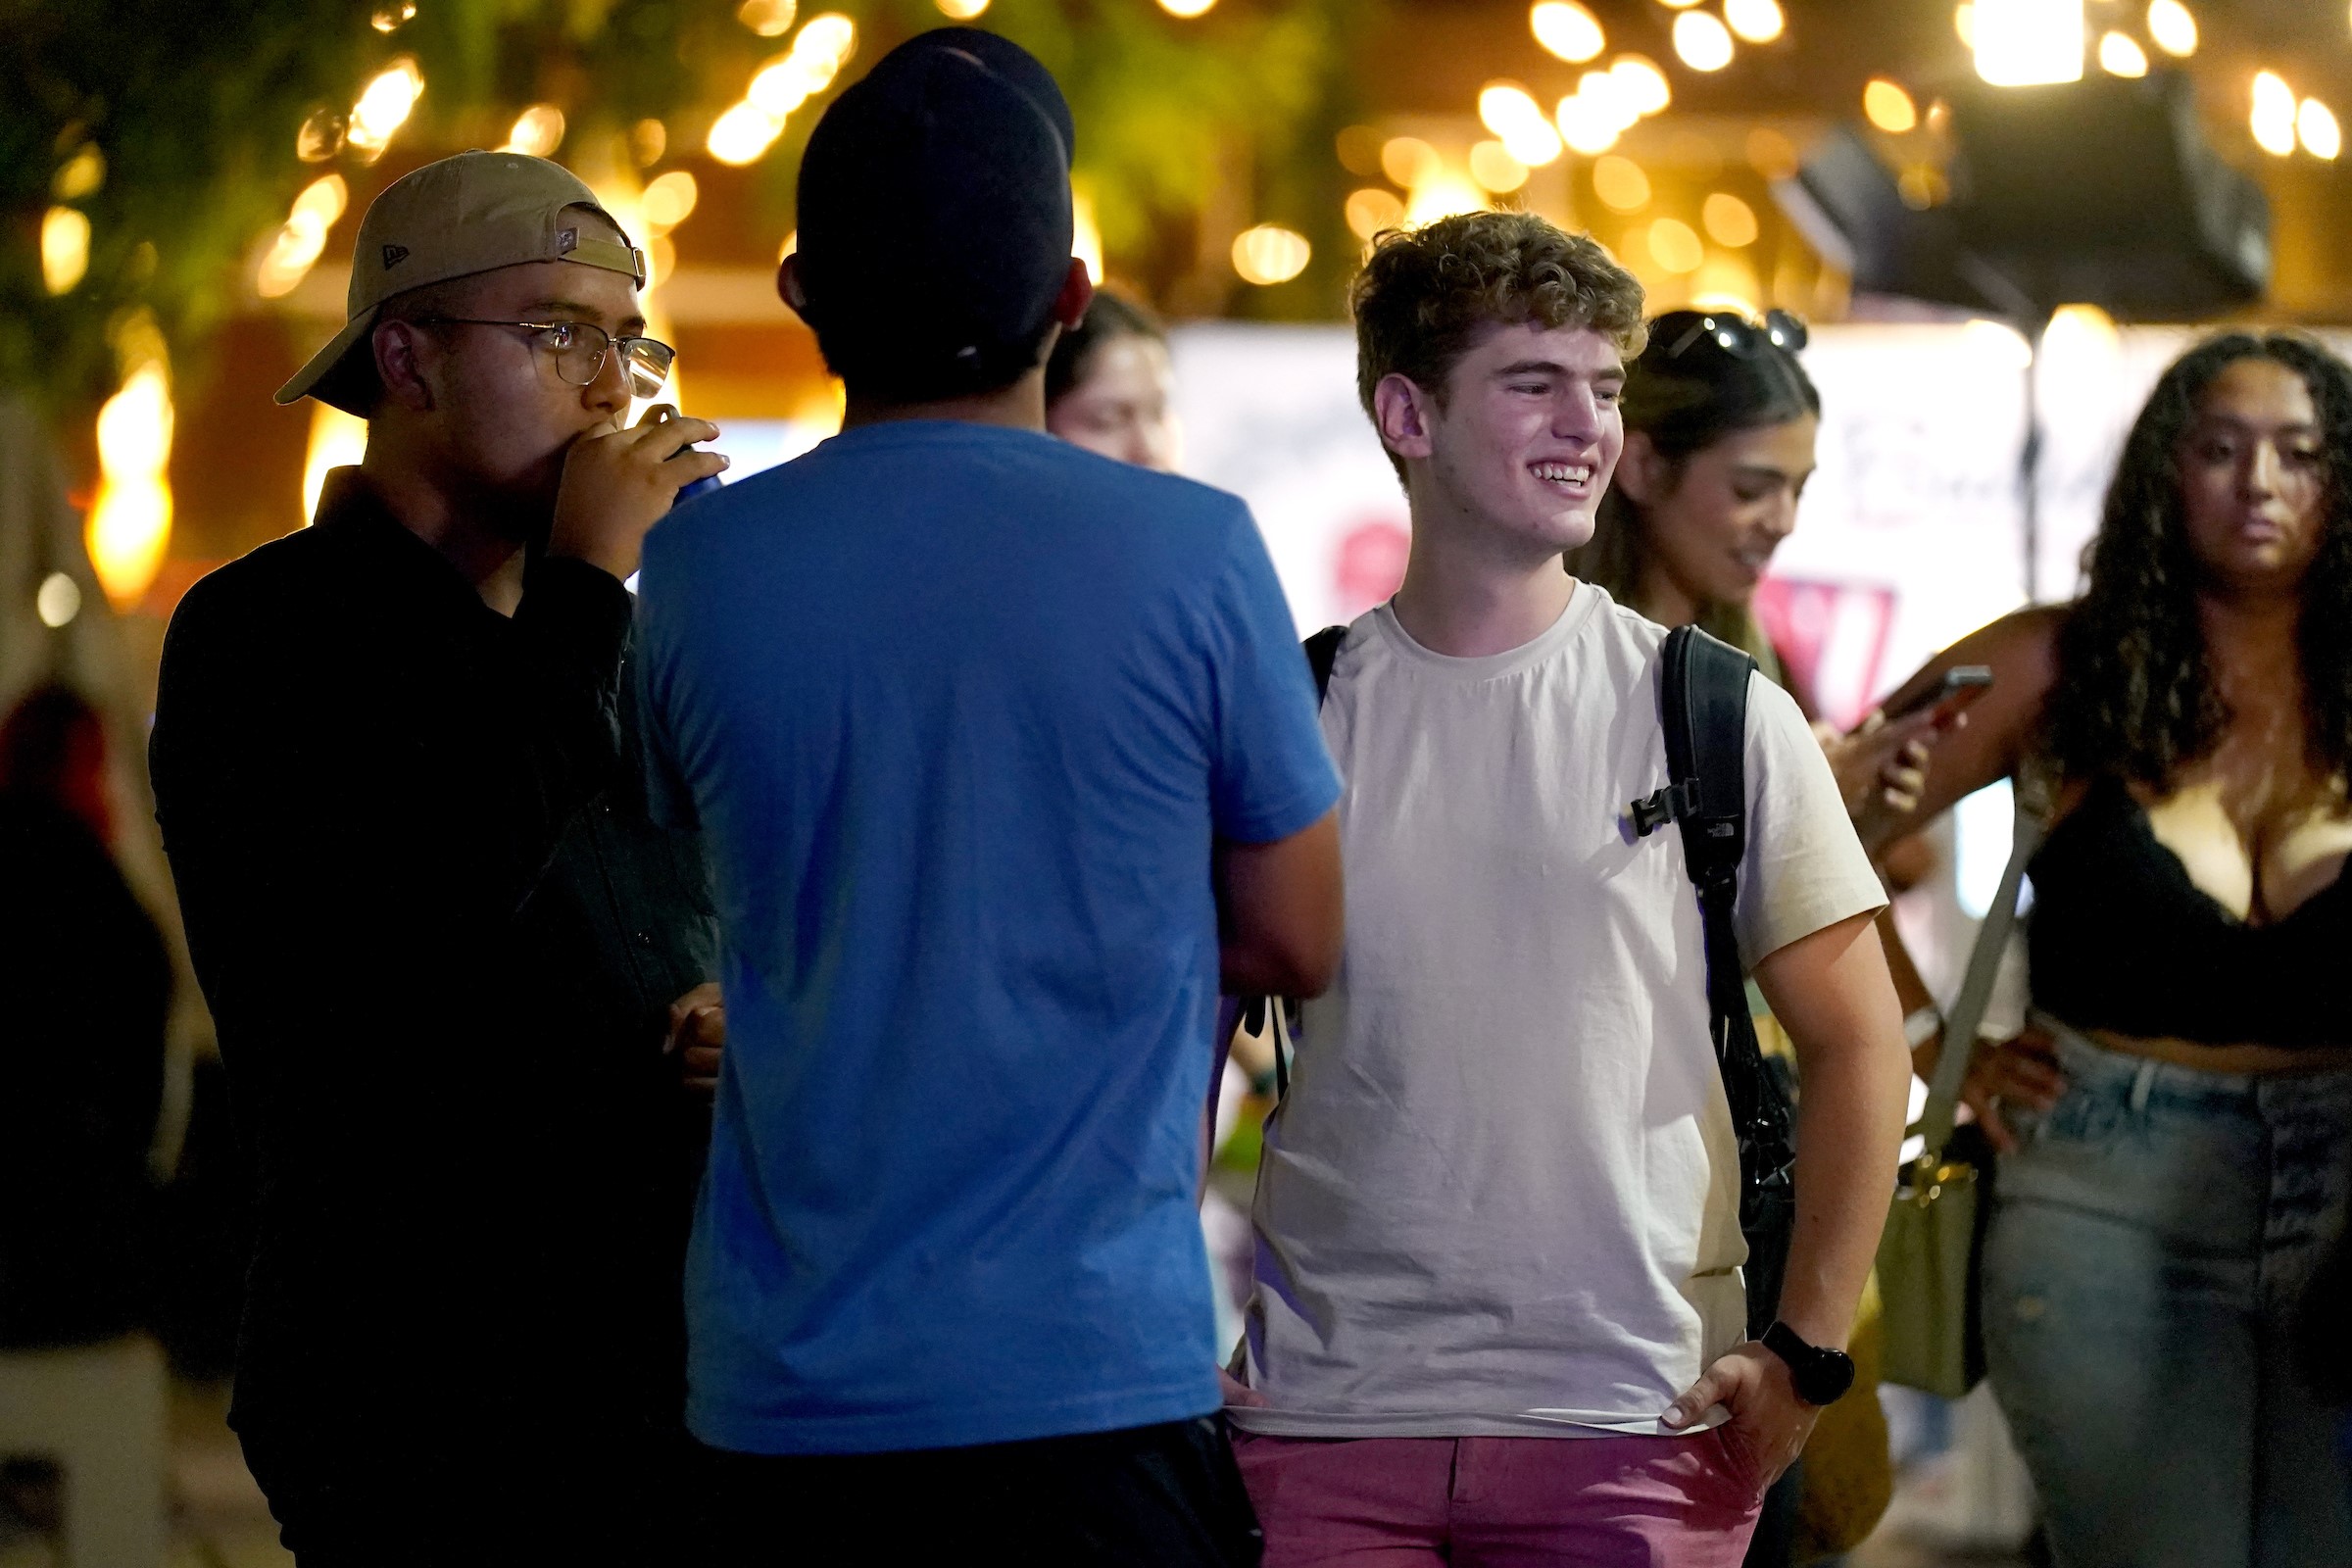 Three male students enjoy the night, standing under twinkling lights